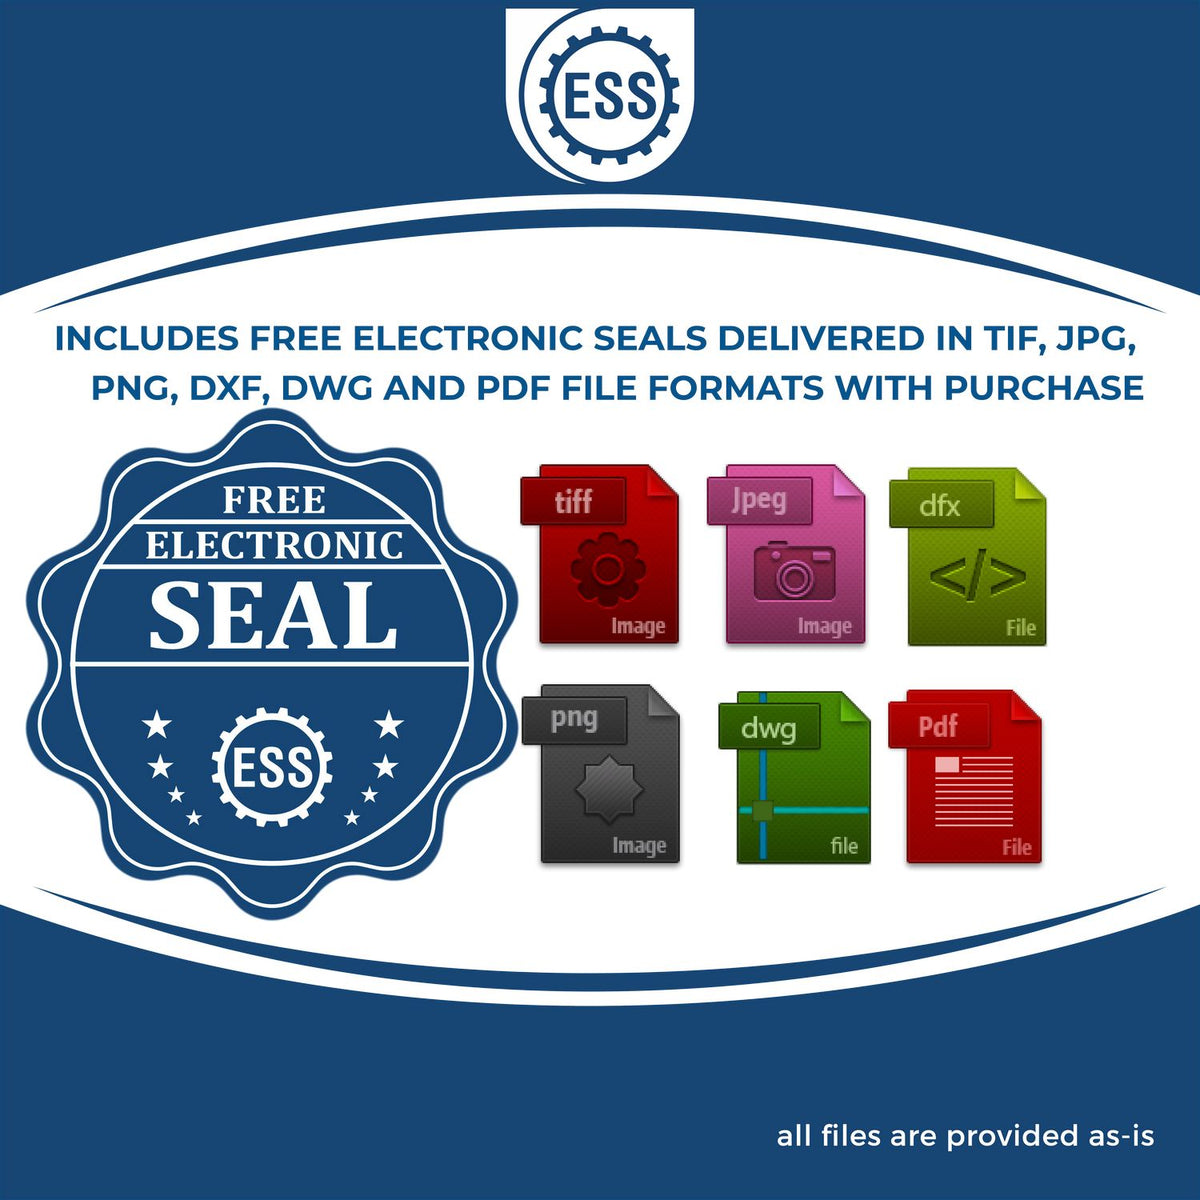 An infographic for the free electronic seal for the Gift Alabama Architect Seal illustrating the different file type icons such as DXF, DWG, TIF, JPG and PNG.